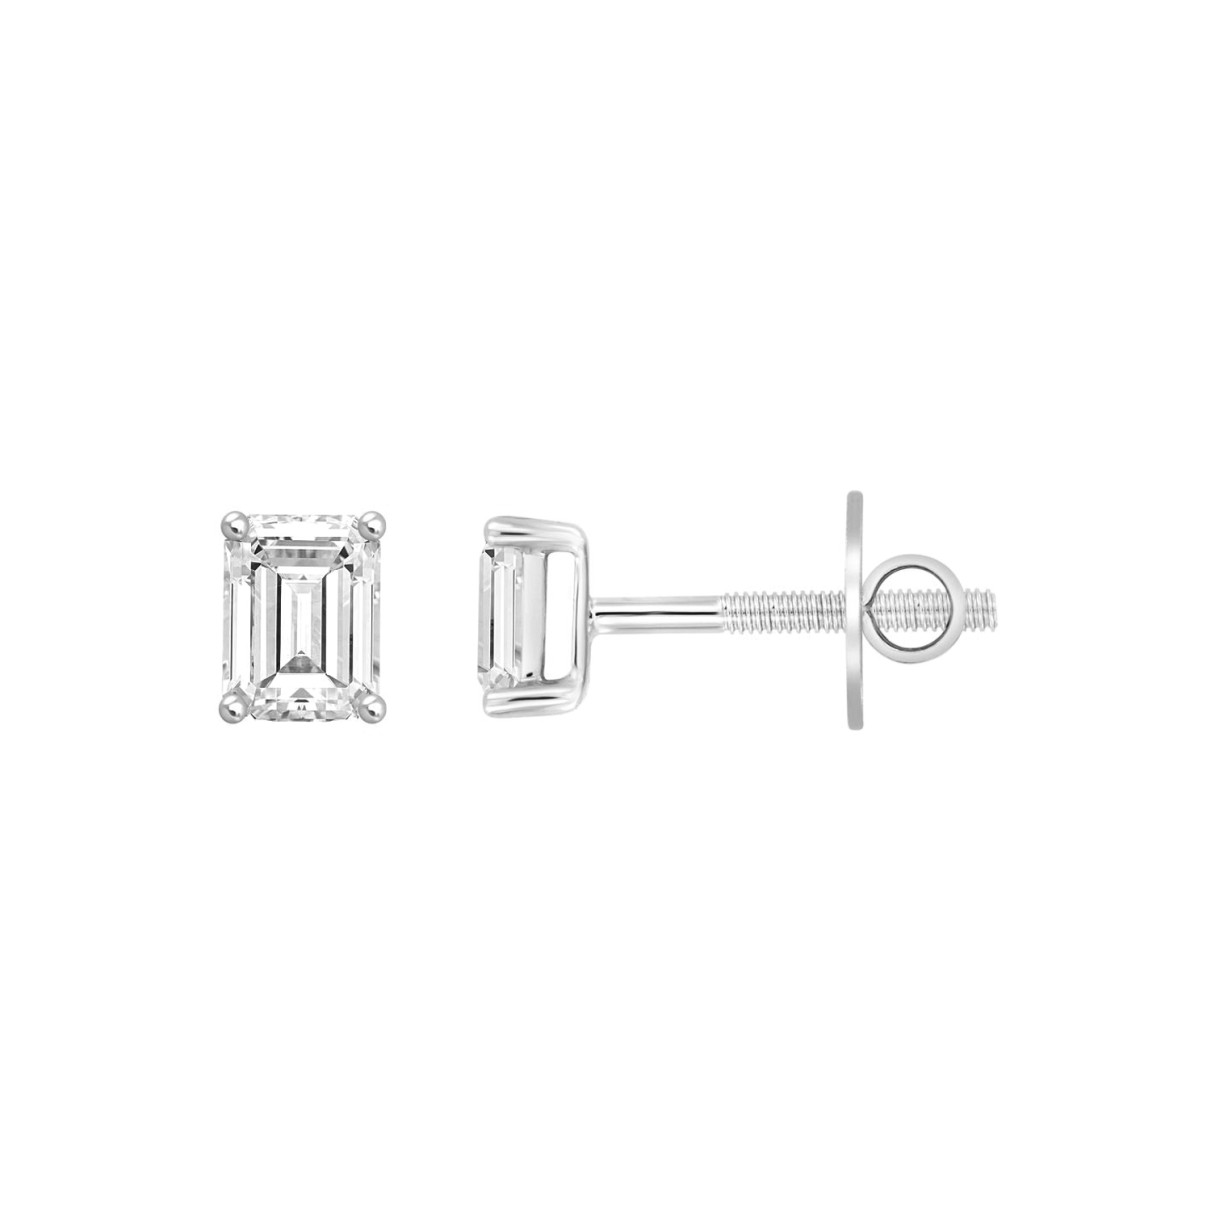 LADIES SOLITAIRE EARRINGS 1/2CT EMERALD DIAMOND 14K WHITE GOLD